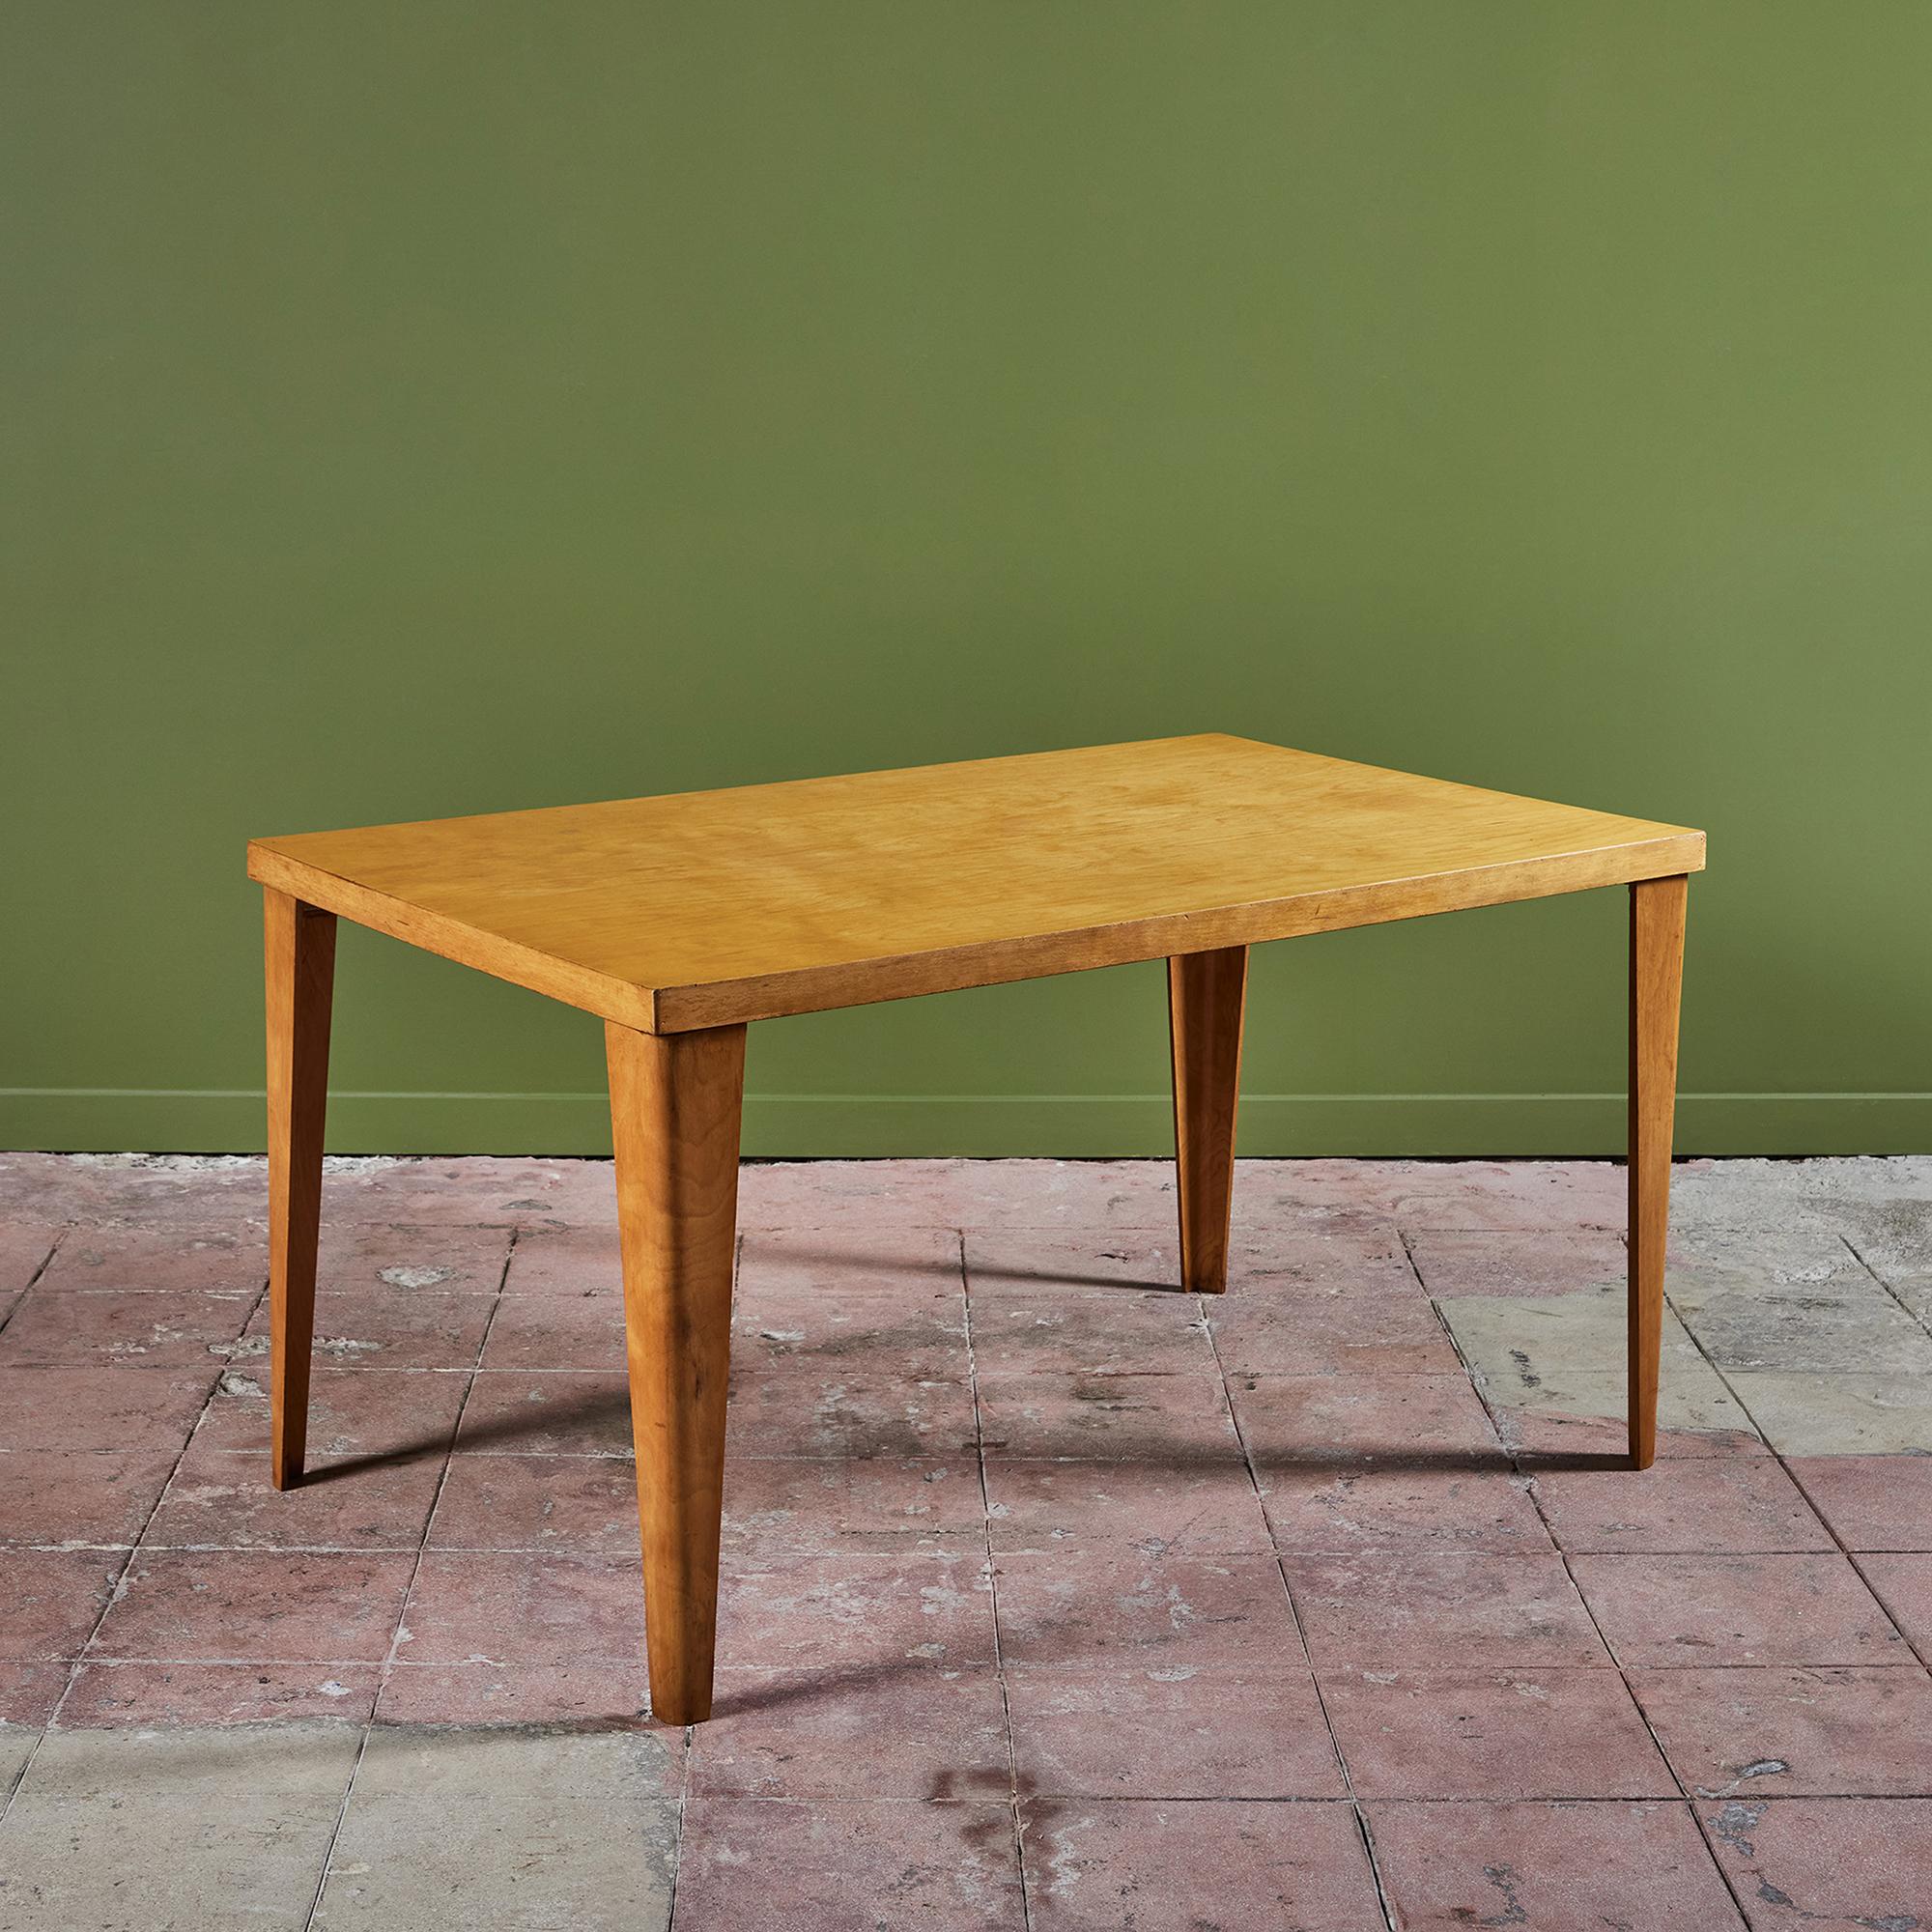 Rare early rectangular dining table in maple bent plywood designed by Ray and Charles Eames and produced by Evans Plywood Division for Herman Miller. Dubbed the DTW-1 (“Dining Table Wood”), this example was introduced in 1945. The DTW-1 has four